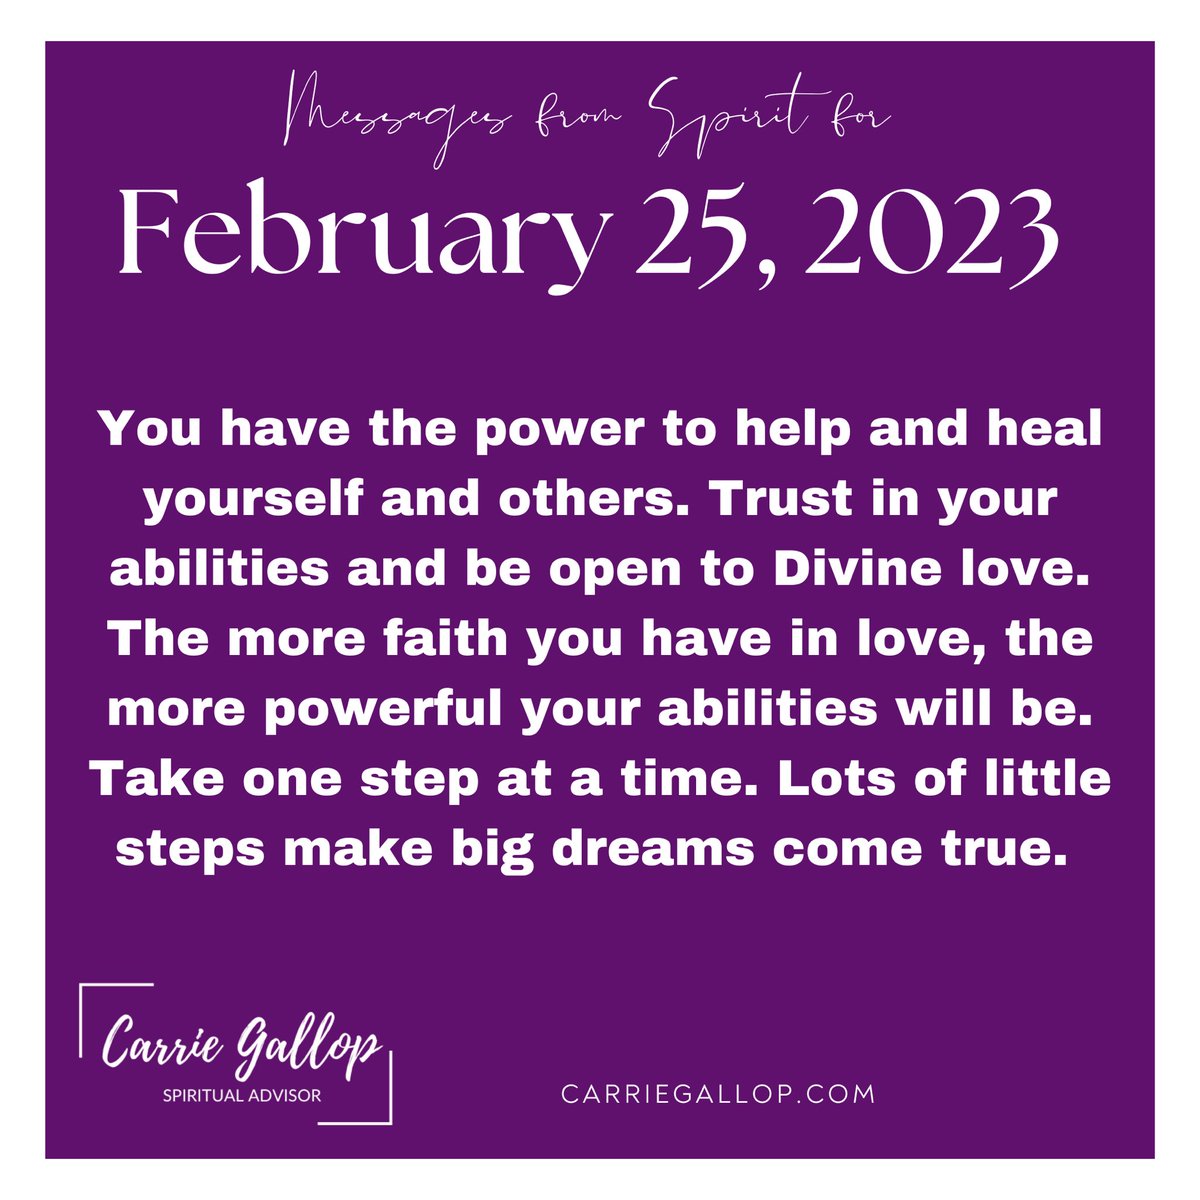 Messages From Spirit for February 25, 2023 ✨

#Daily #Guidance #Message #MessagesFromSpirit #February25 #Feb25 #YouHaveThePower #Help #Heal #Yourself #Others #Trust #Abilities #BeOpen #Divine #Love #Faith #Powerful #Power #TakeOneStep #LittleSteps #BigDreams #Dreams